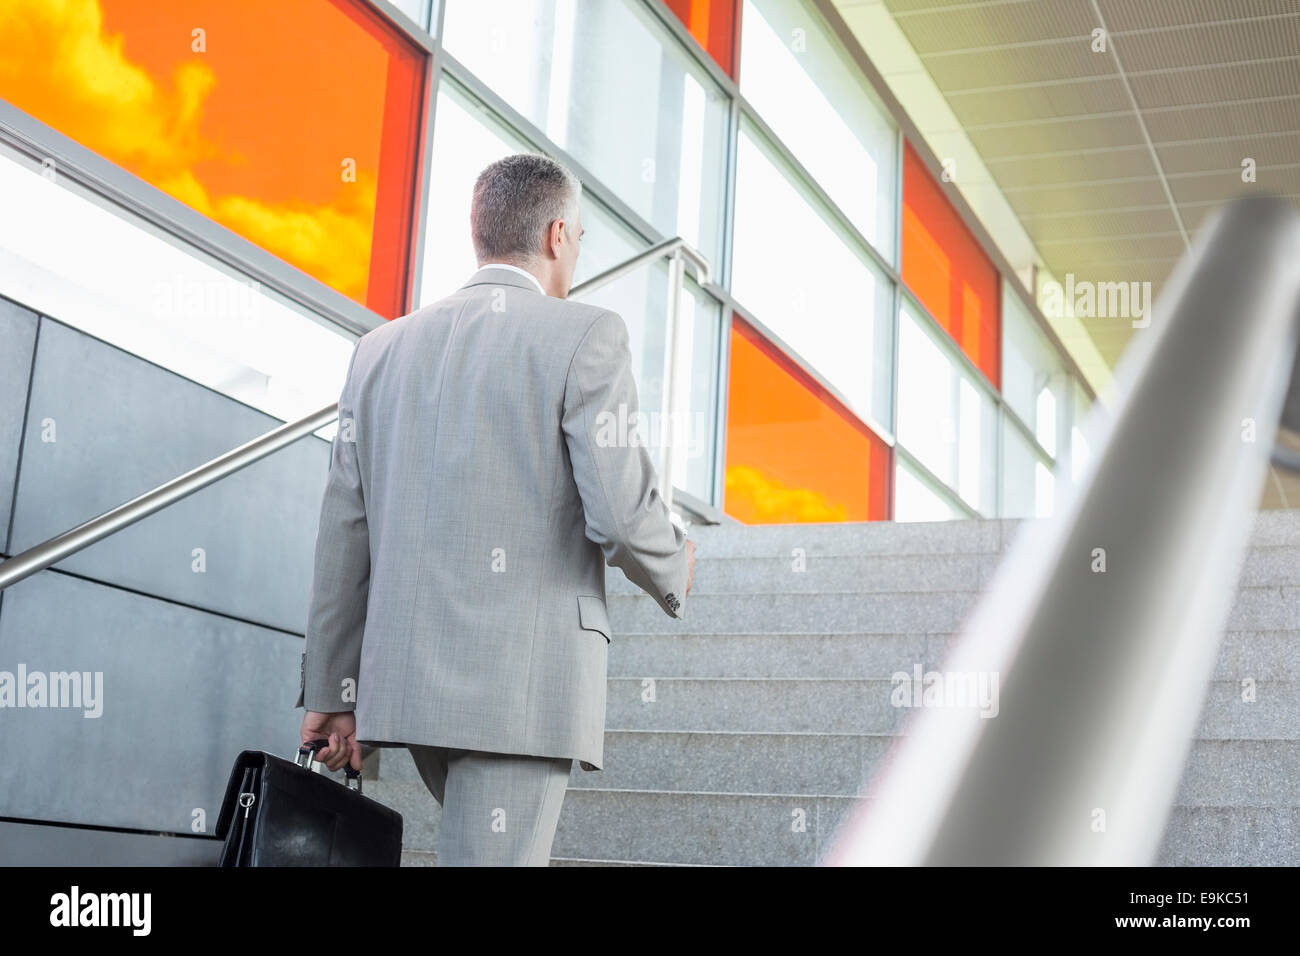 Rear view of middle aged businessman walking up stairs in railroad station Stock Photo